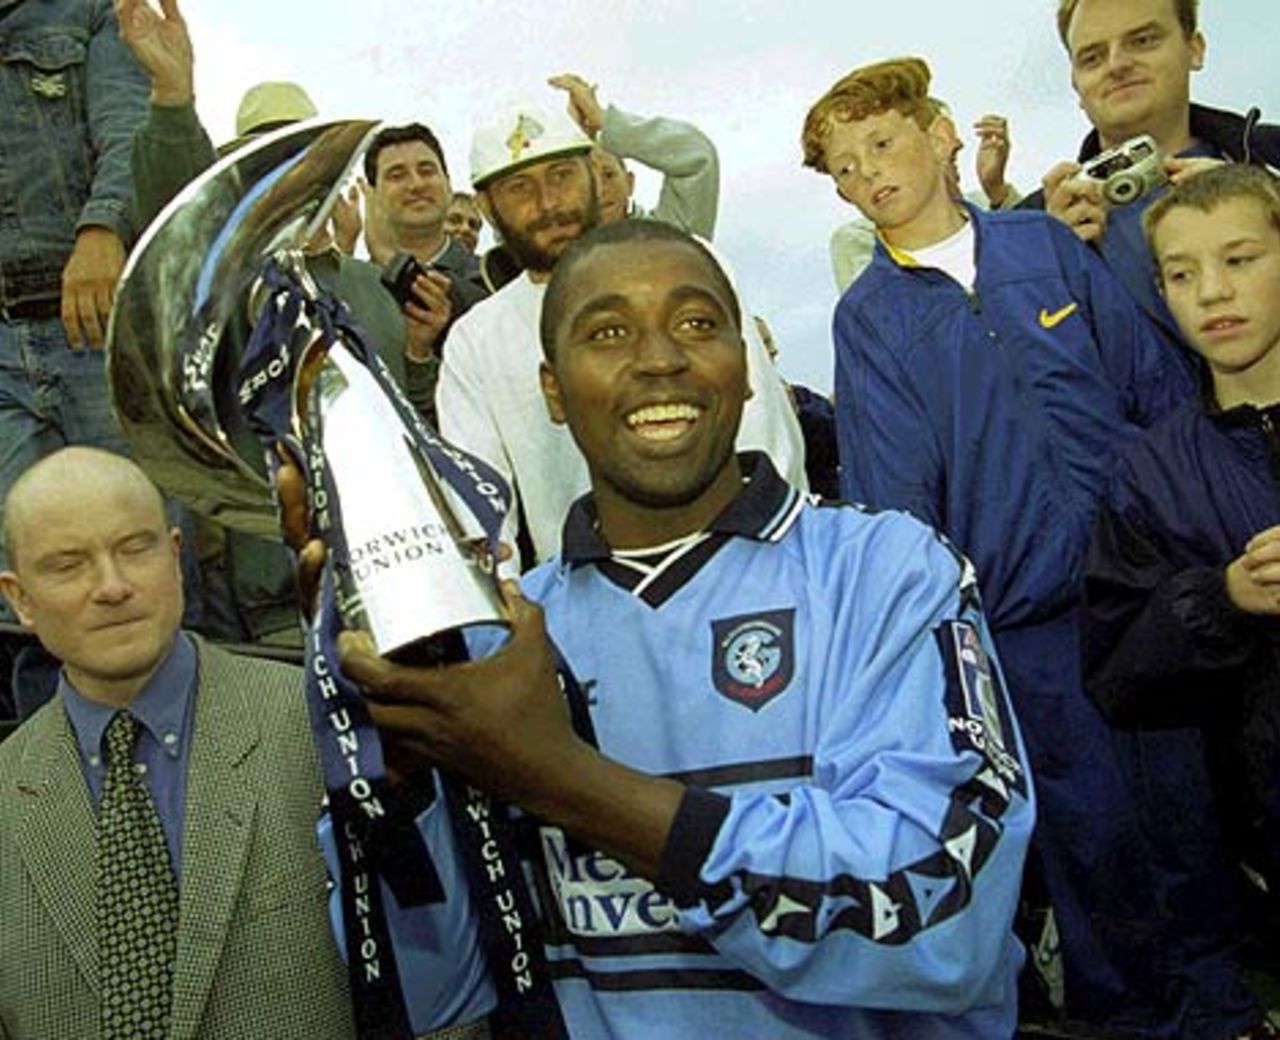 17 Sep 2000: Gloucestershire captain Mark Alleyne celebrates after winning the NCL Trophy during the Norwich Union NCL match between Gloucestershire Gladiators and Northamptonshire Steelbacks match played in Bristol.